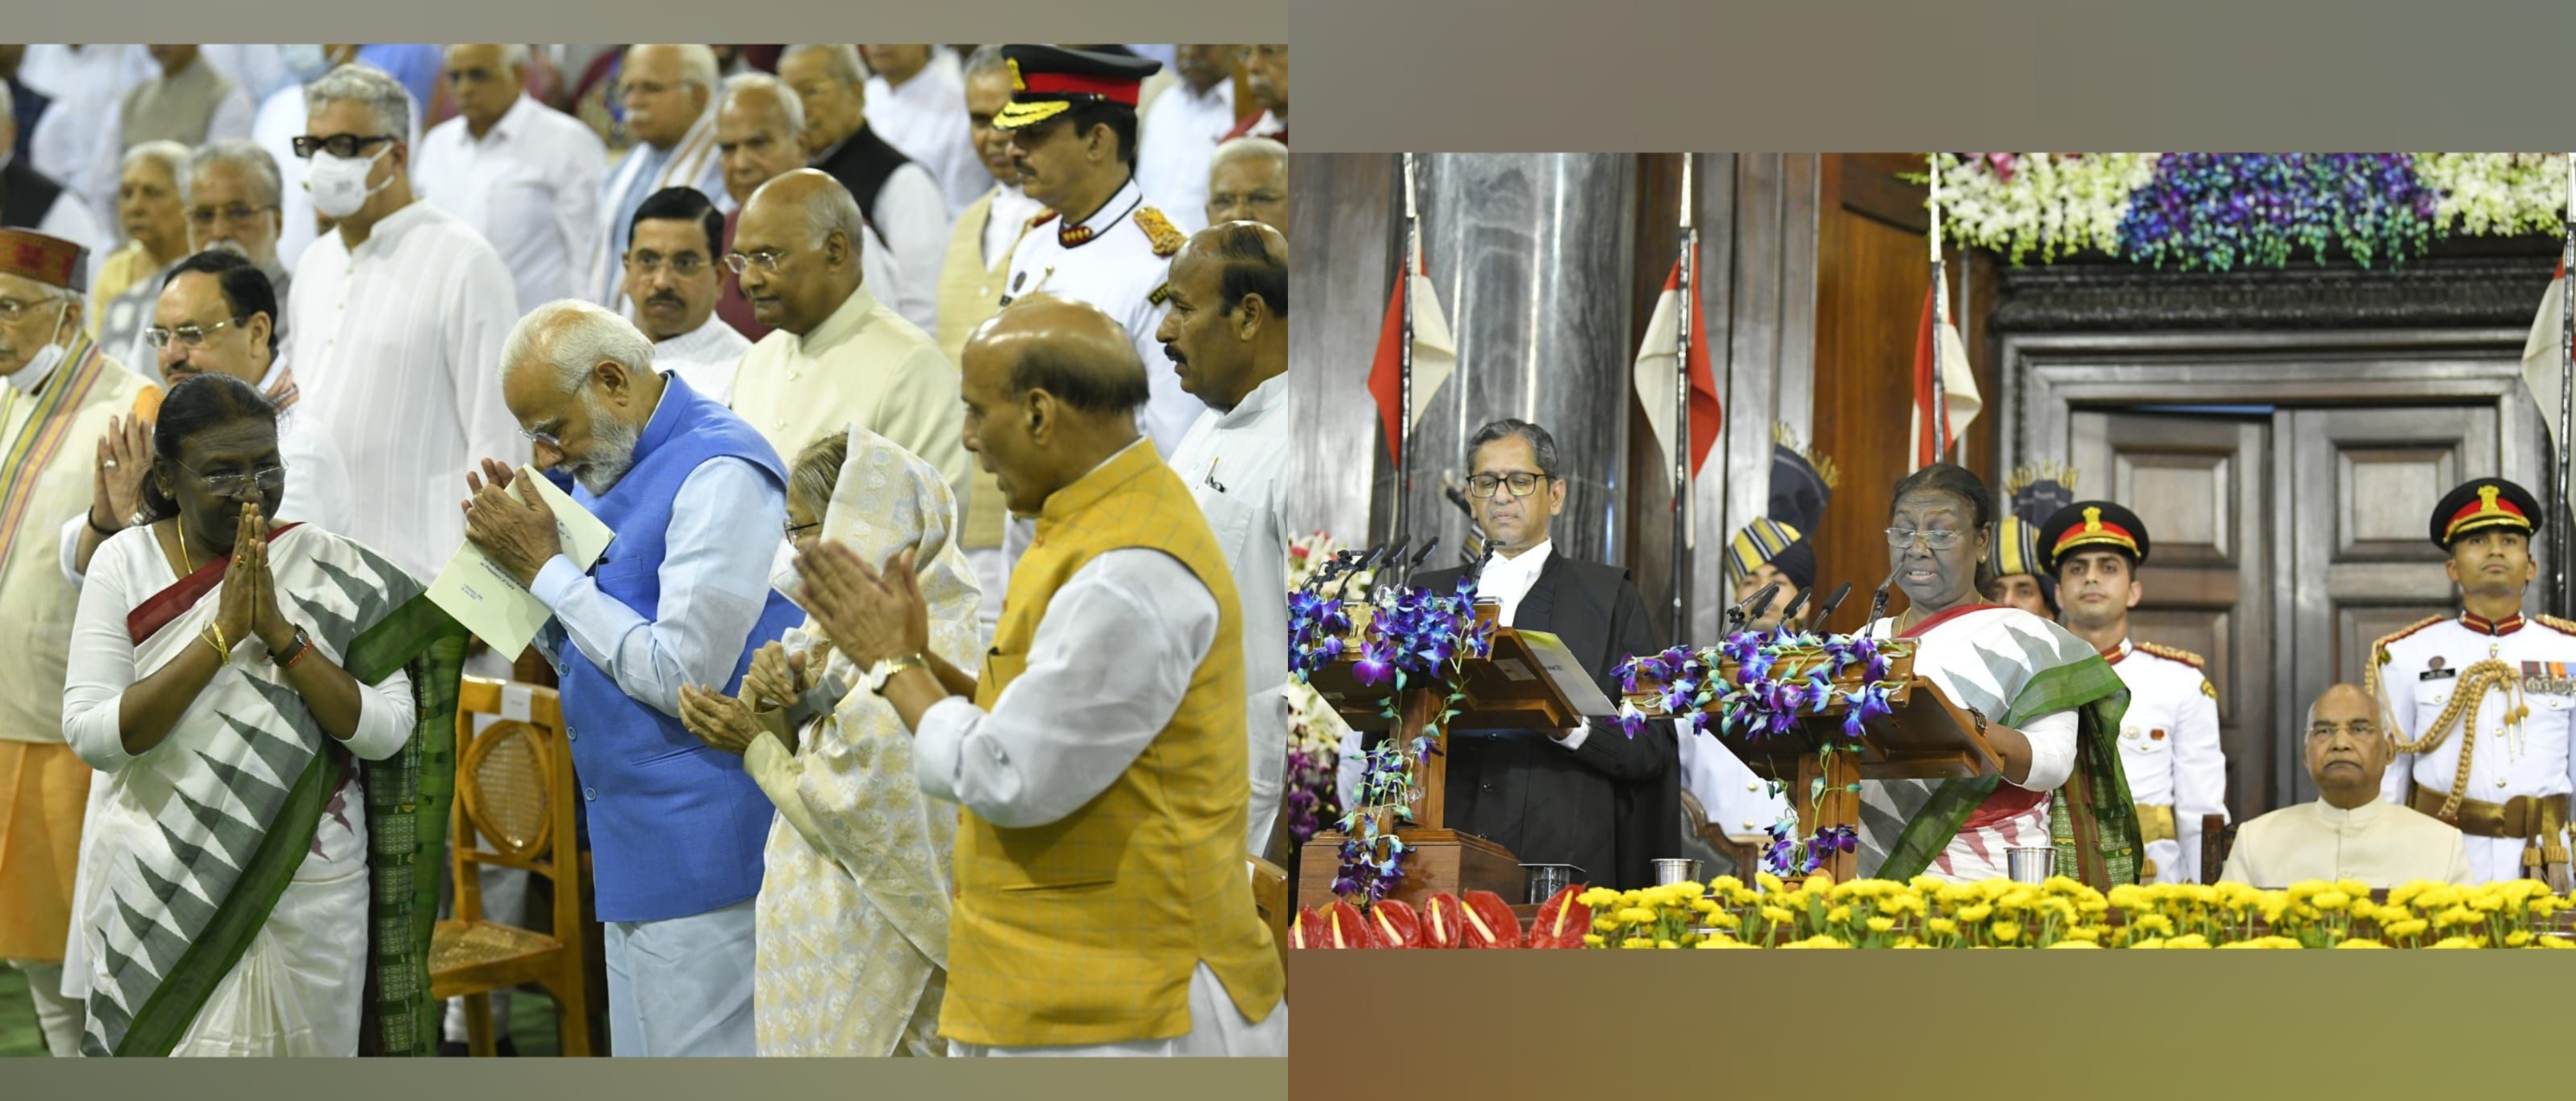  <div style="fcolor: #fff; font-weight: 600; font-size: 1.5em;">
<p style="font-size: 13.8px;">Smt.Droupadi Murmu takes oath as 15th President of Republic of India. She is the first person from tribal background and second woman to become the President of India.

<br /><span style="text-align: center;">24 July 2022</span></p>
</div>